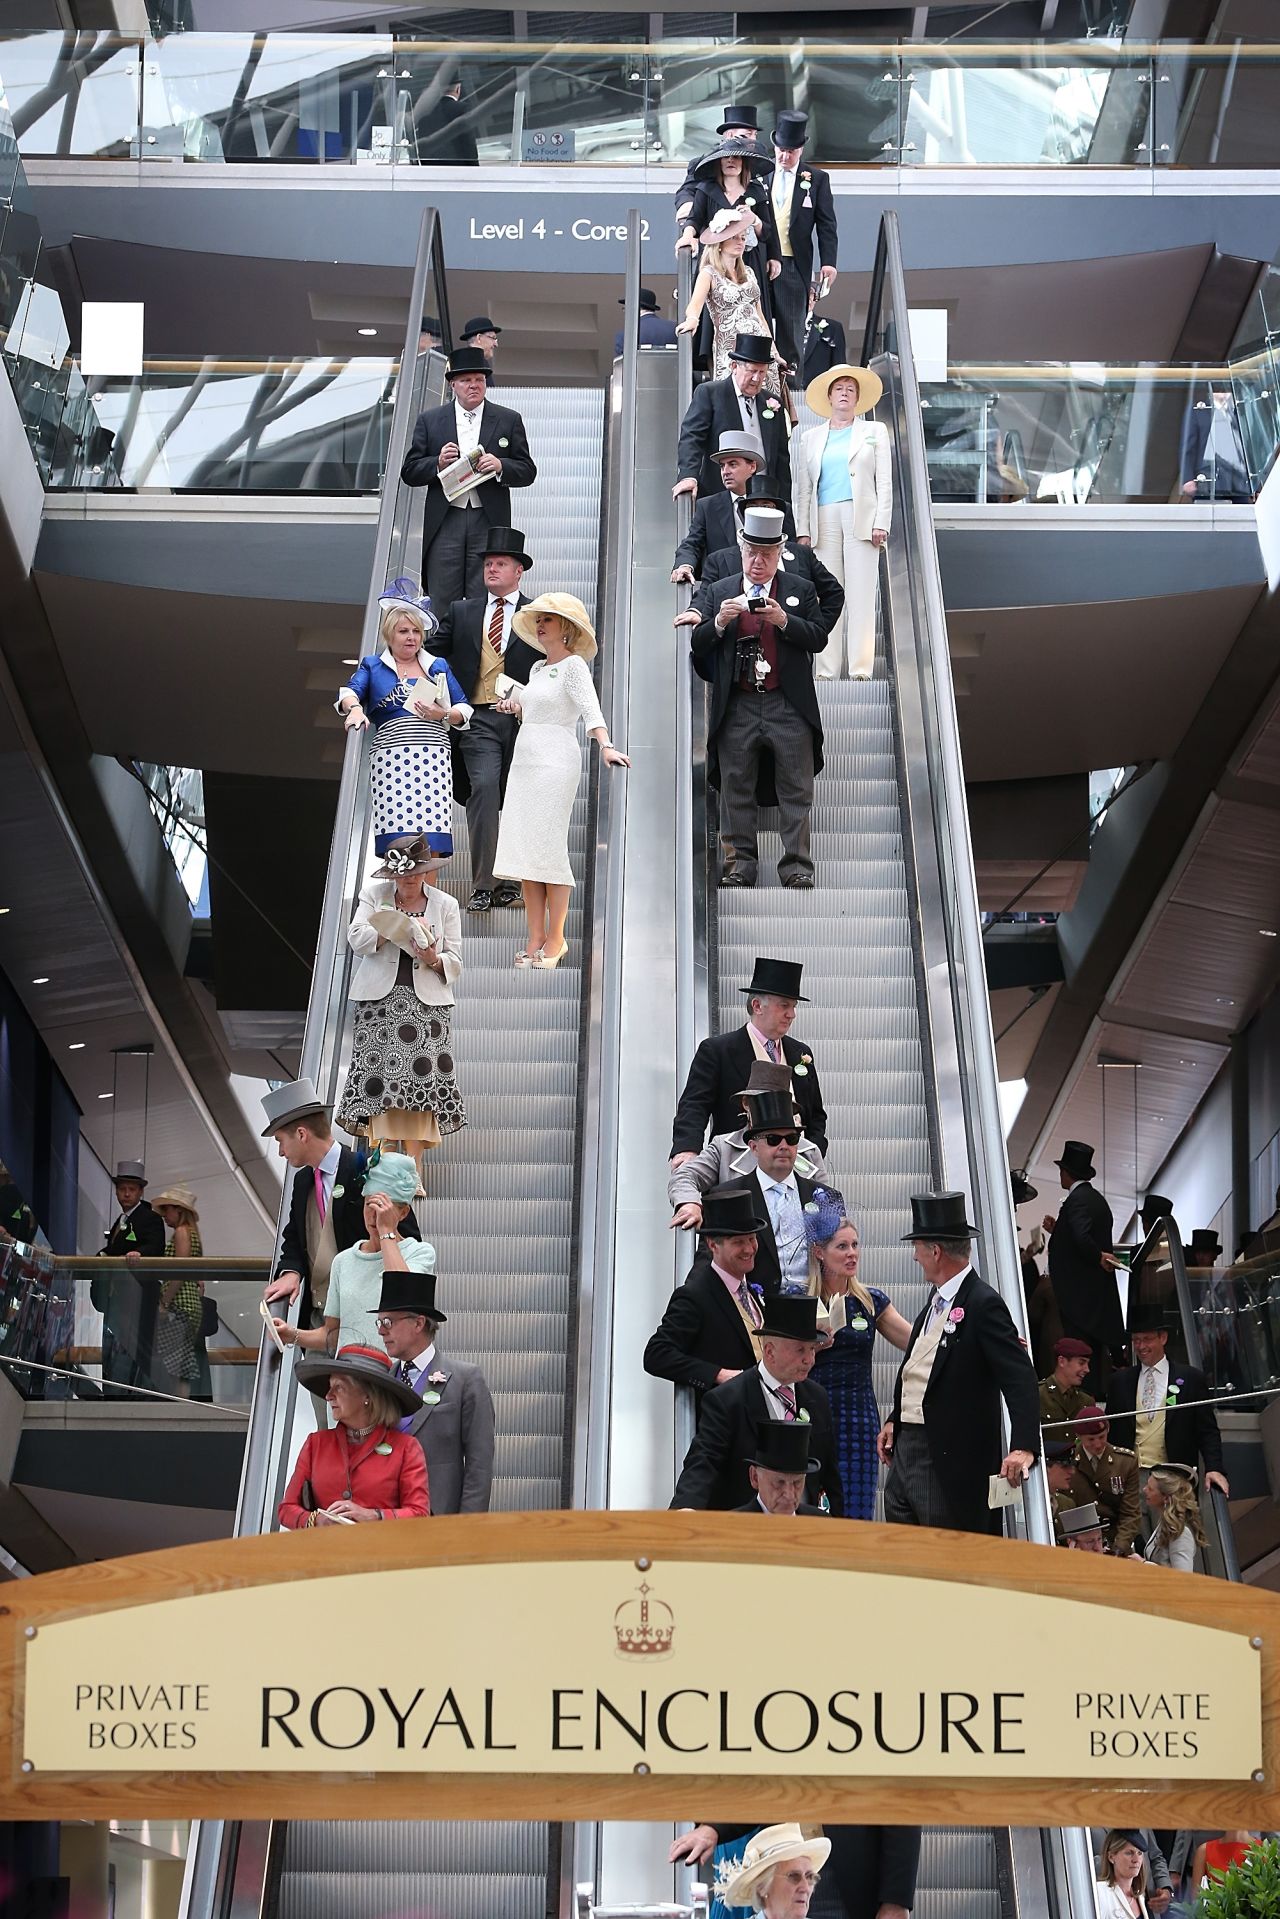 The plush marquees feature escalators, chandeliers and fine dining. Expect to mingle with royalty, lords and real fair ladies. "It's just incredibly beautiful," said Nick Smith, head of communications. "Imagine the smartest restaurants you've ever seen."